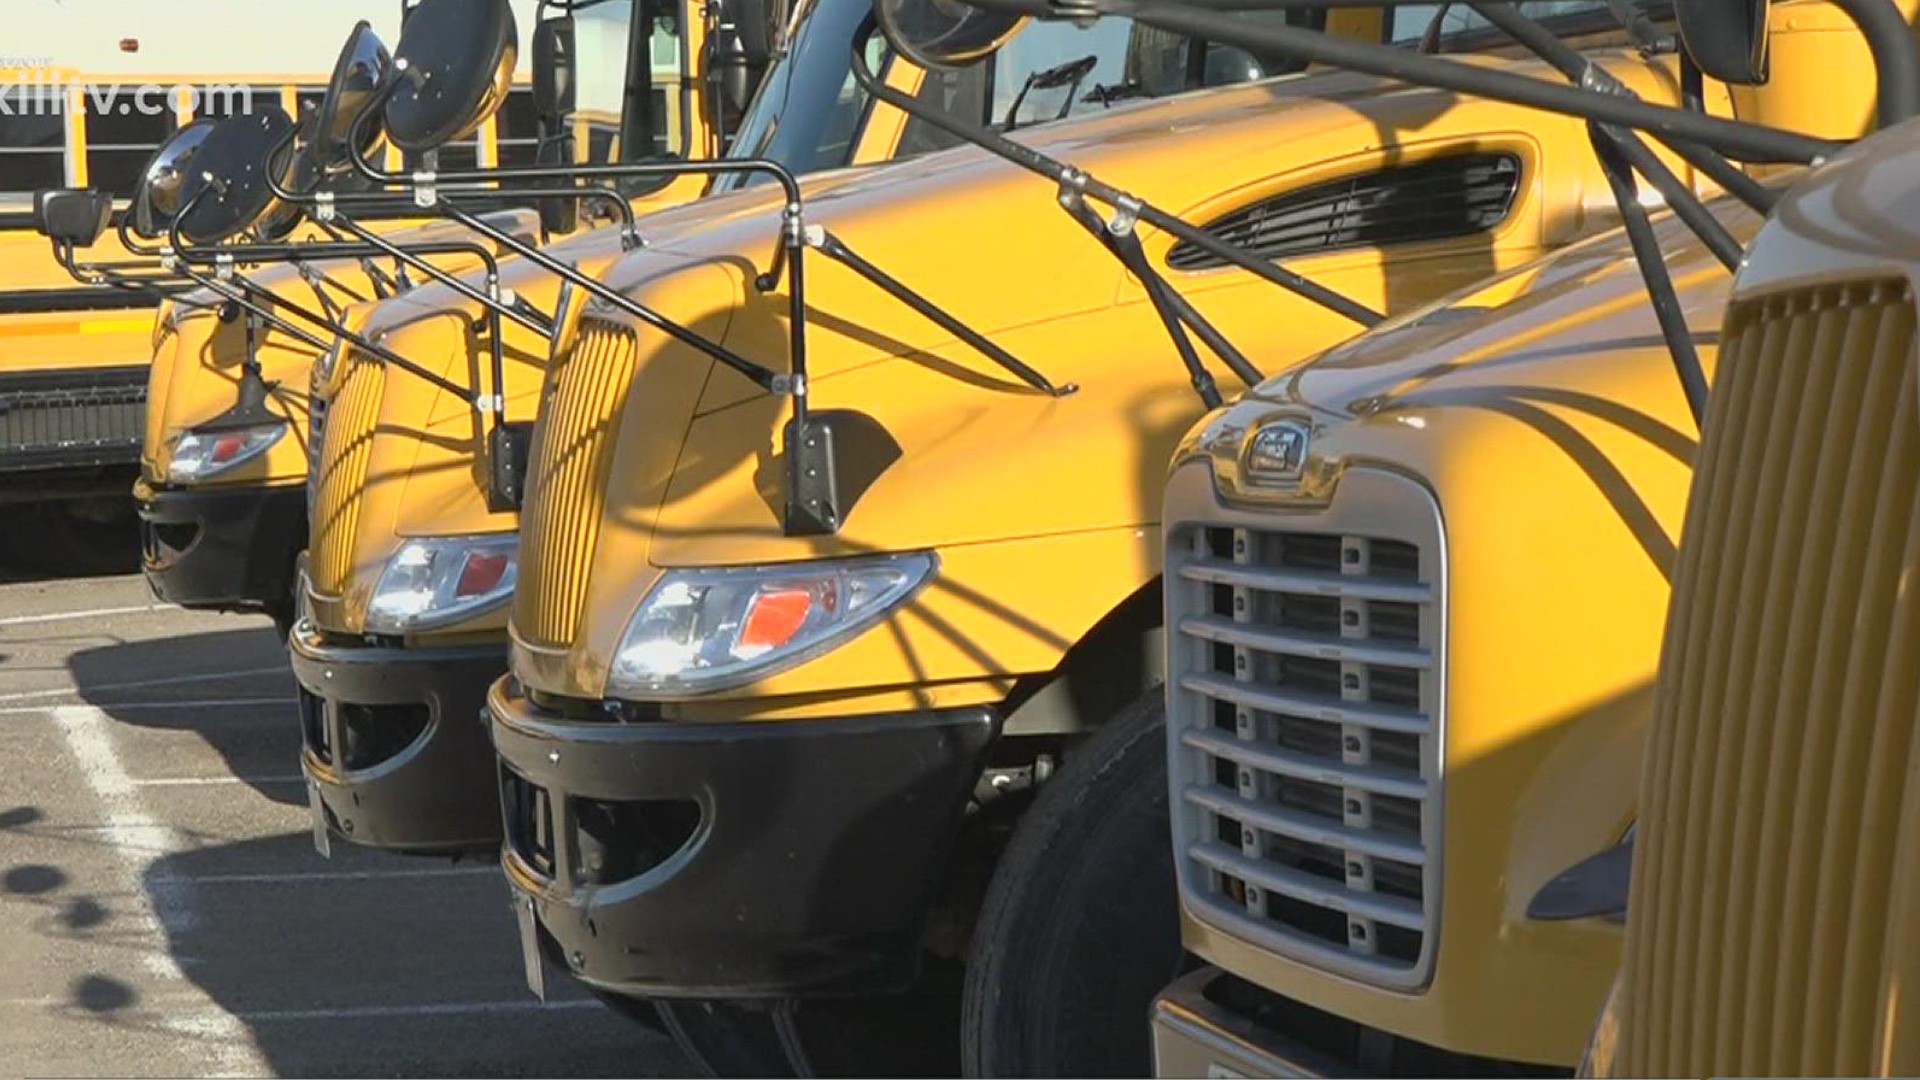 Alice ISD provided 1,200 Chromebooks for students and added Wi-Fi to buses so kids can access the internet no matter how far they live from school.